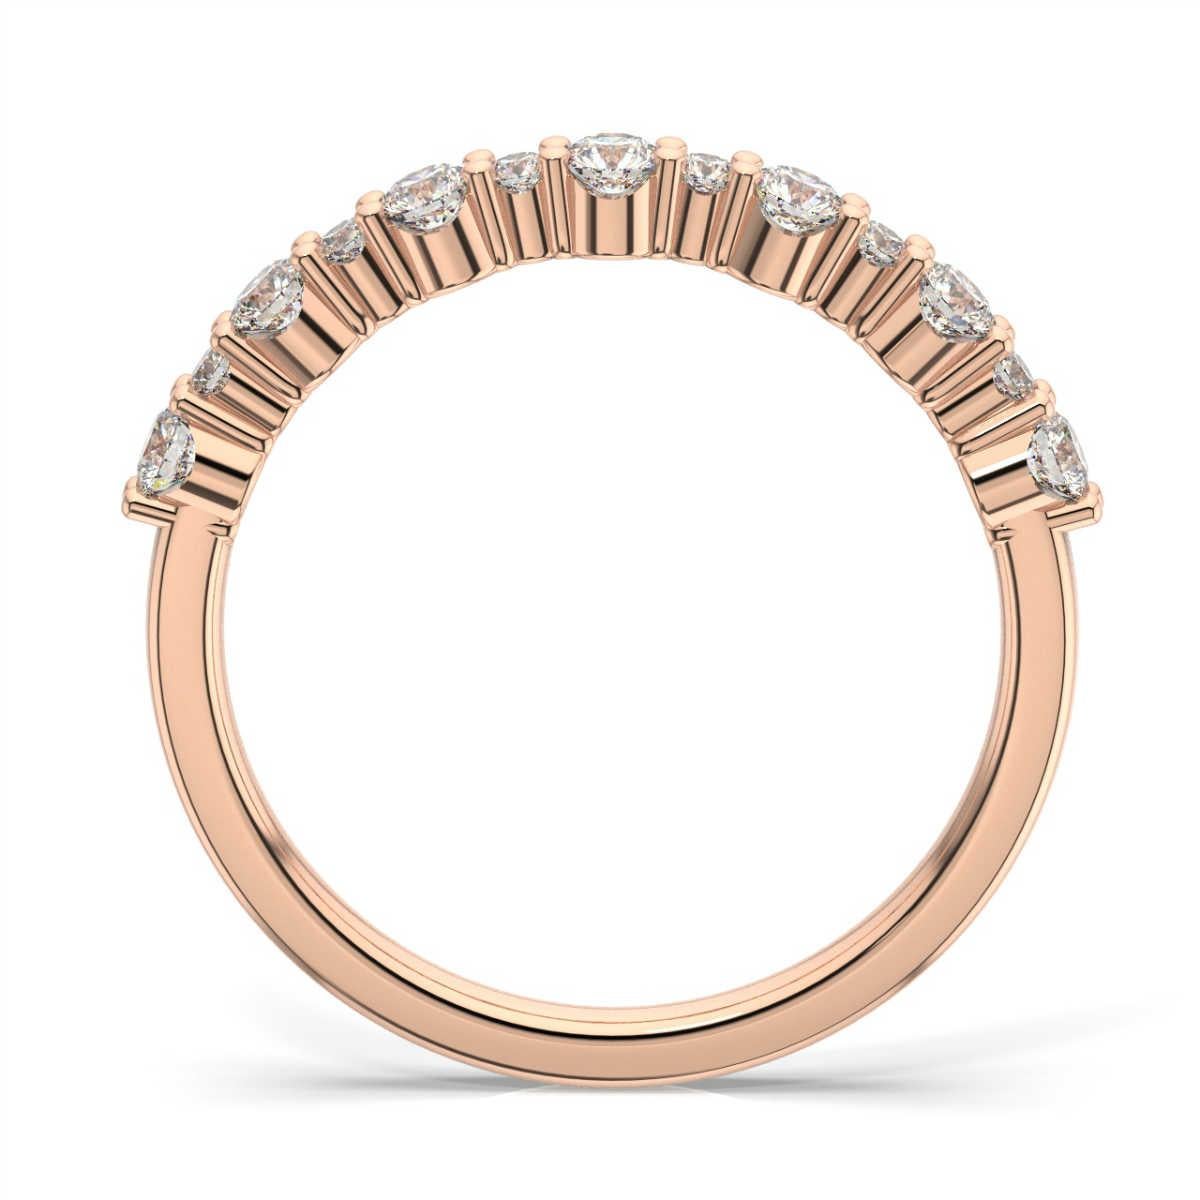 This Petite band features 13 alternating round brilliant diamonds. Experience the difference!

Product details: 

Center Gemstone Color: WHITE
Side Gemstone Type: NATURAL DIAMOND
Side Gemstone Shape: ROUND
Metal: 14K Rose Gold
Metal Weight: